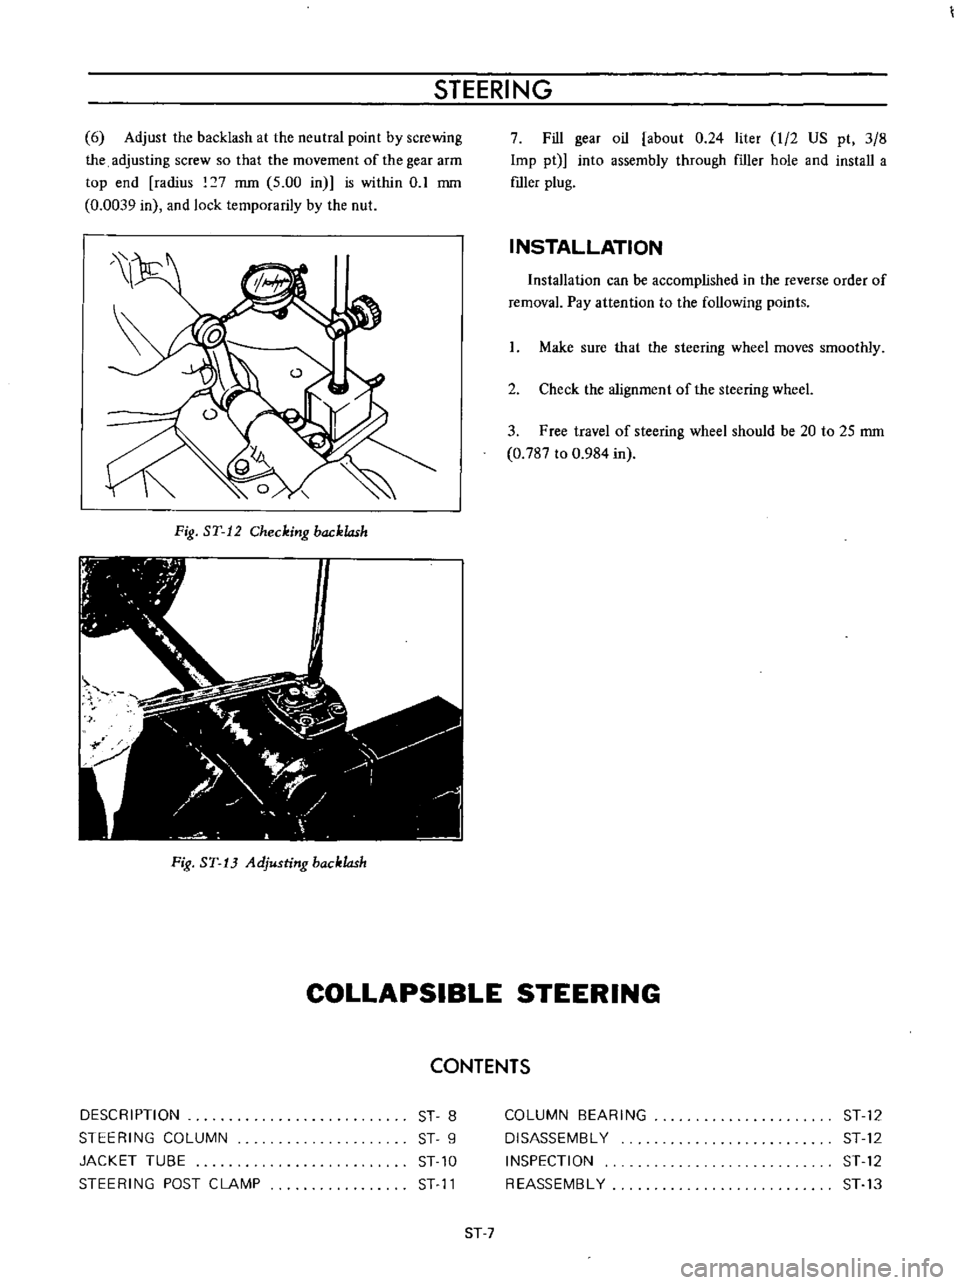 DATSUN B110 1973  Service Repair Manual 
STEERING

6

Adjust 
the 
backlash 
at

the 
neutral

point 
by 
screwing

the

adjusting 
screw 
so 
that 
the 
movement 
of 
the

gear 
arm

top 
end

radius 
7 
mm 
5

00 
in 
is 
within 
0 
1 
mm